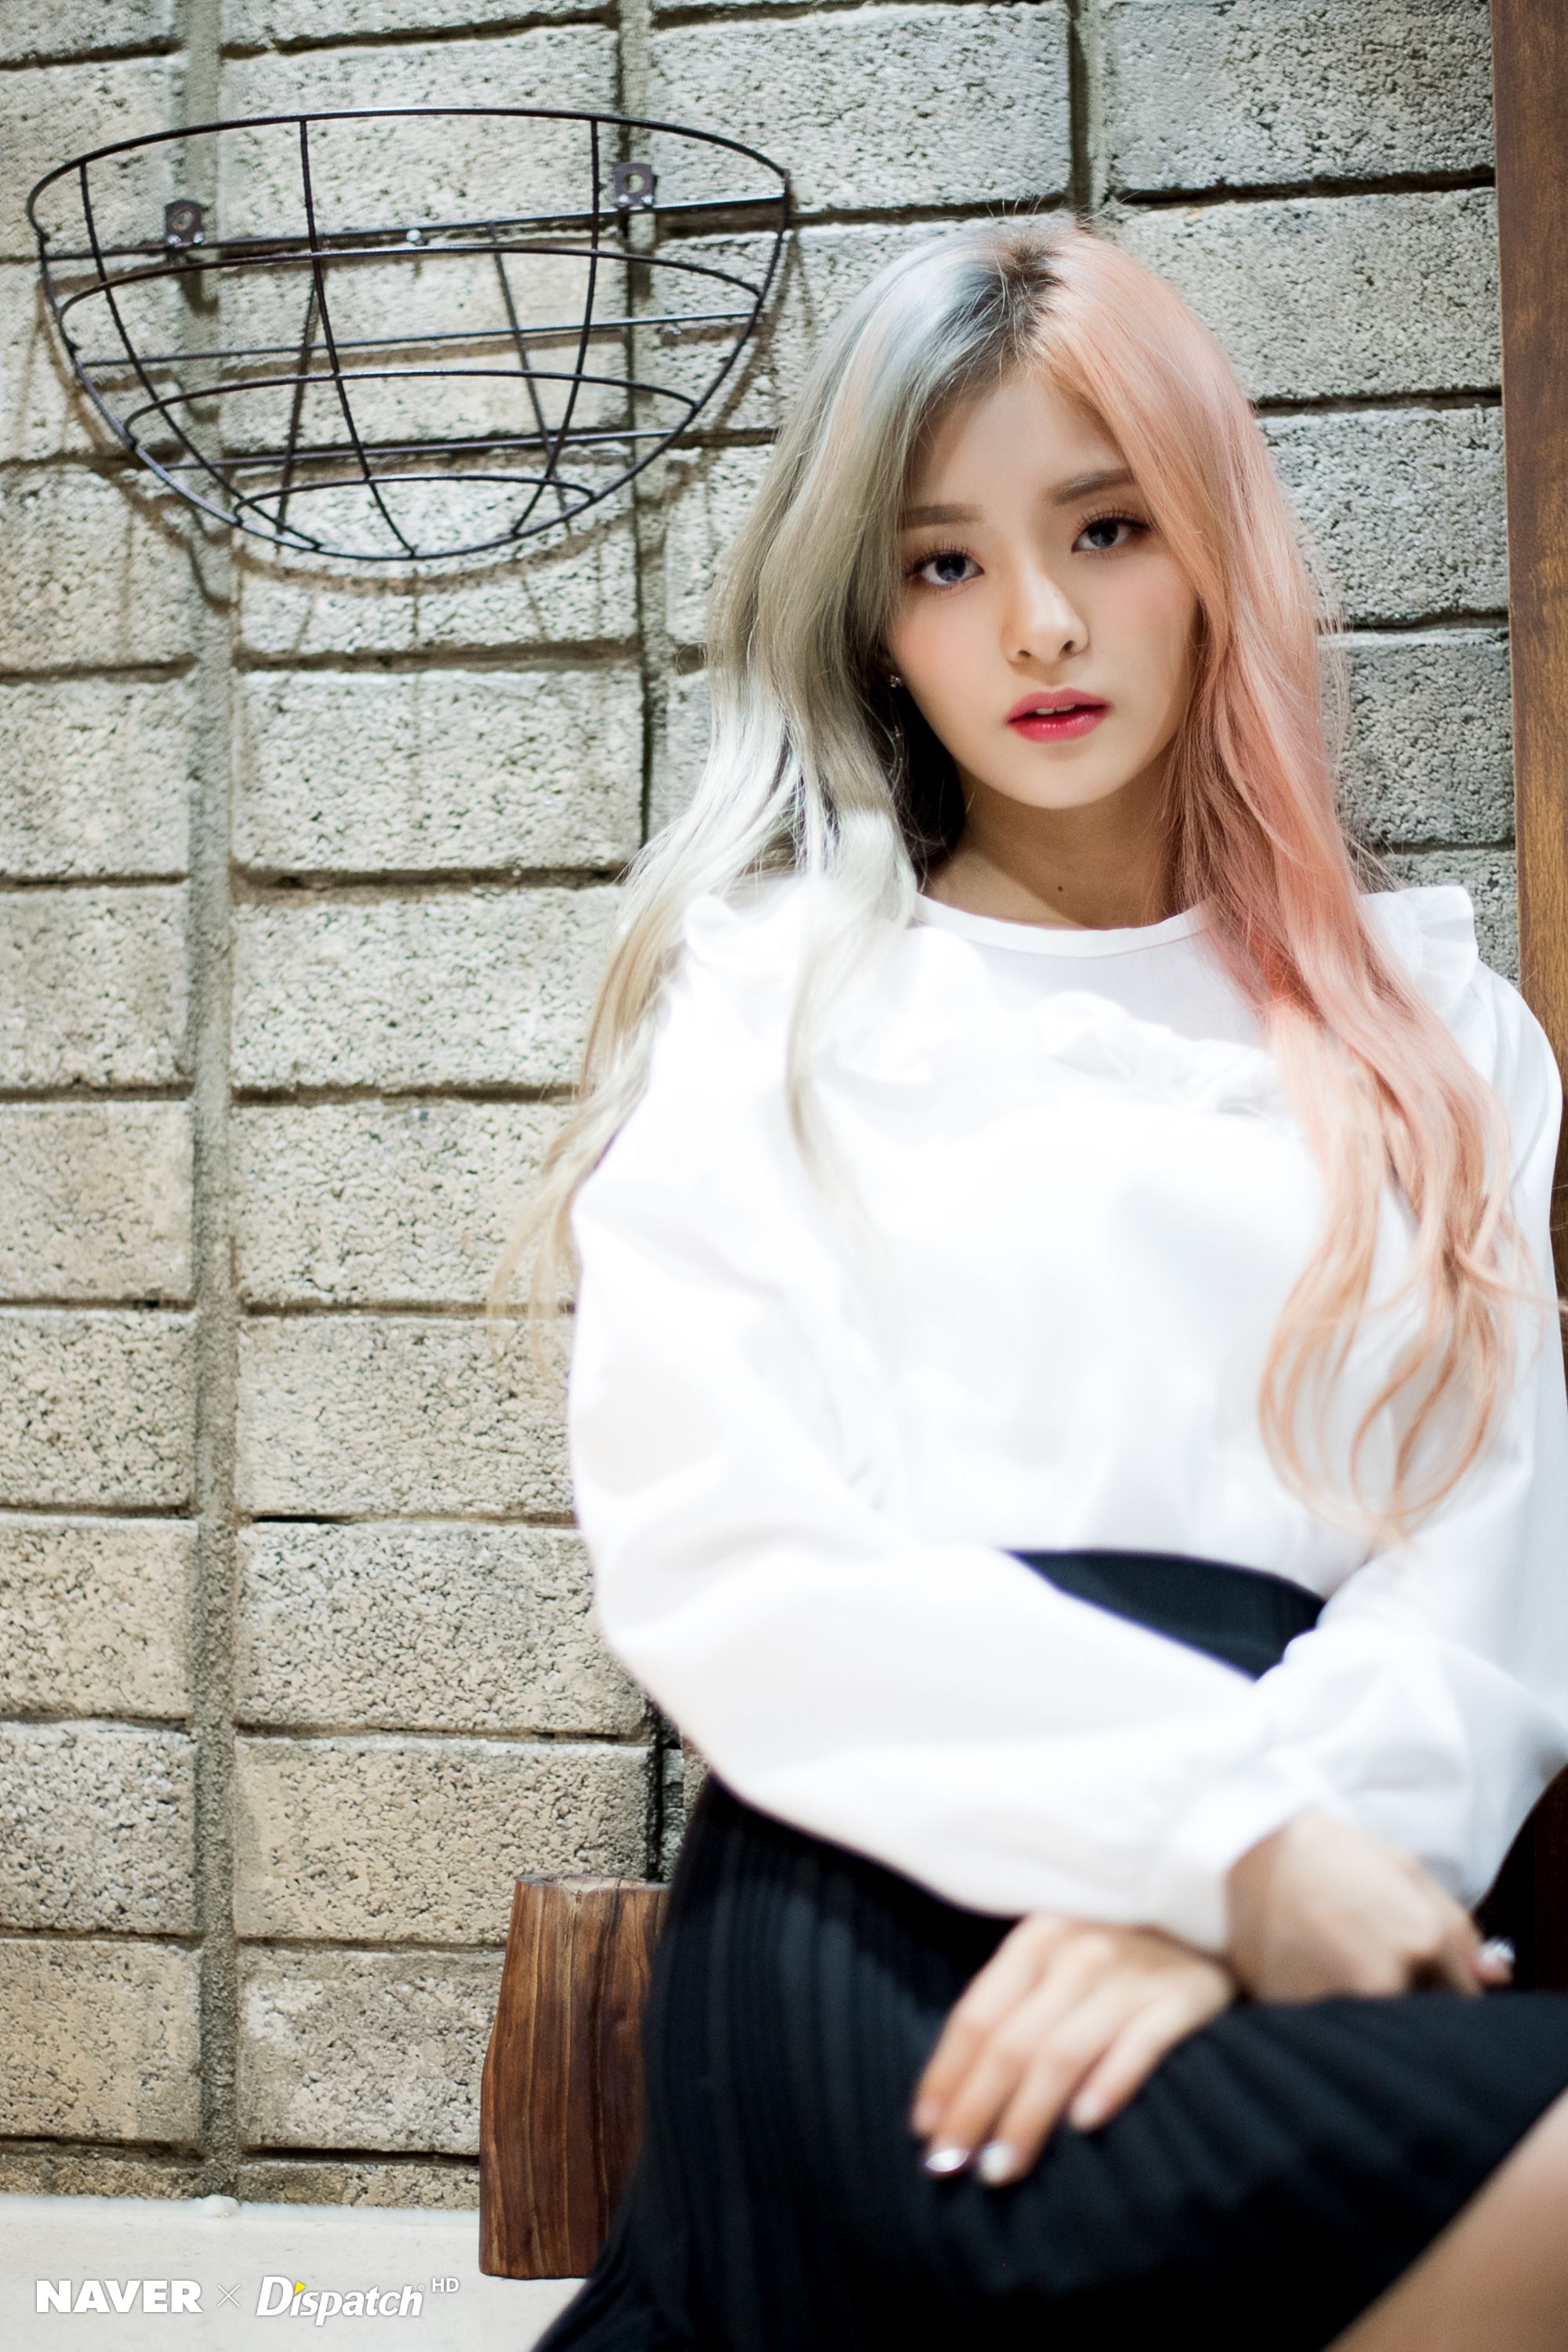 Fromis Lee Nagyung Pepero Day Event By Naver X Dispatch